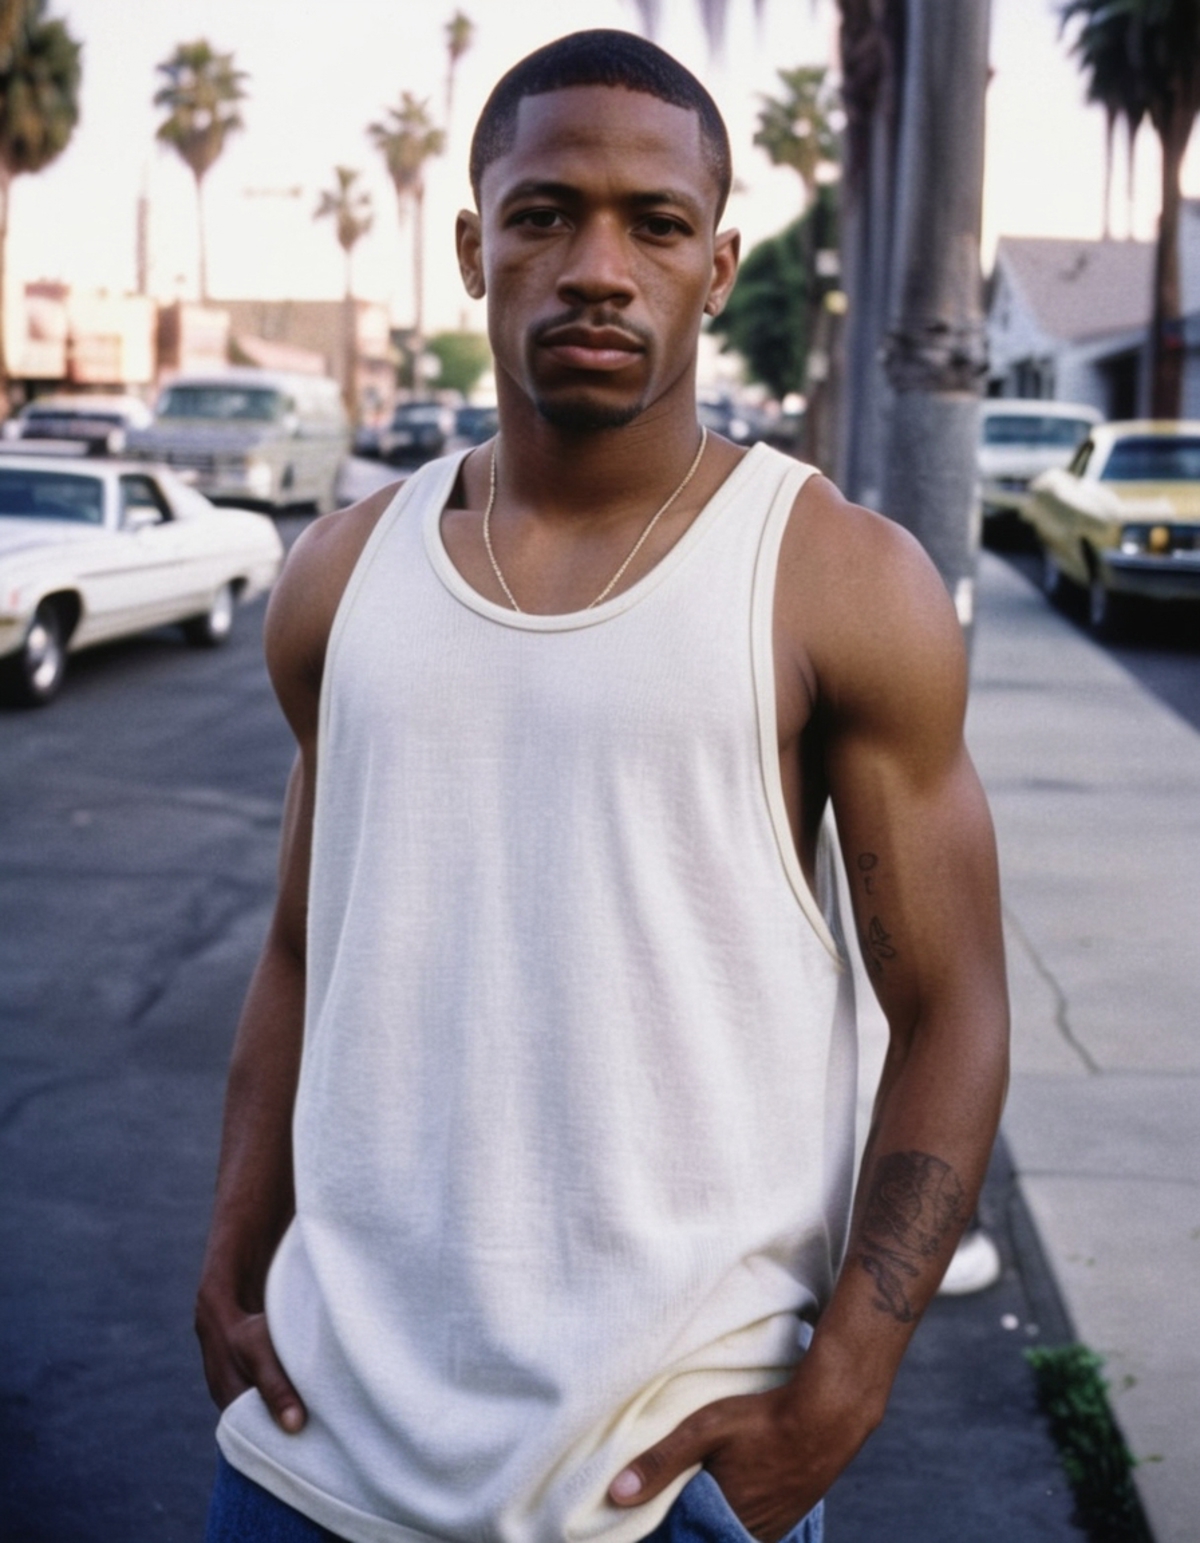 Man in White Tank Top and Necklace Standing on Sidewalk.